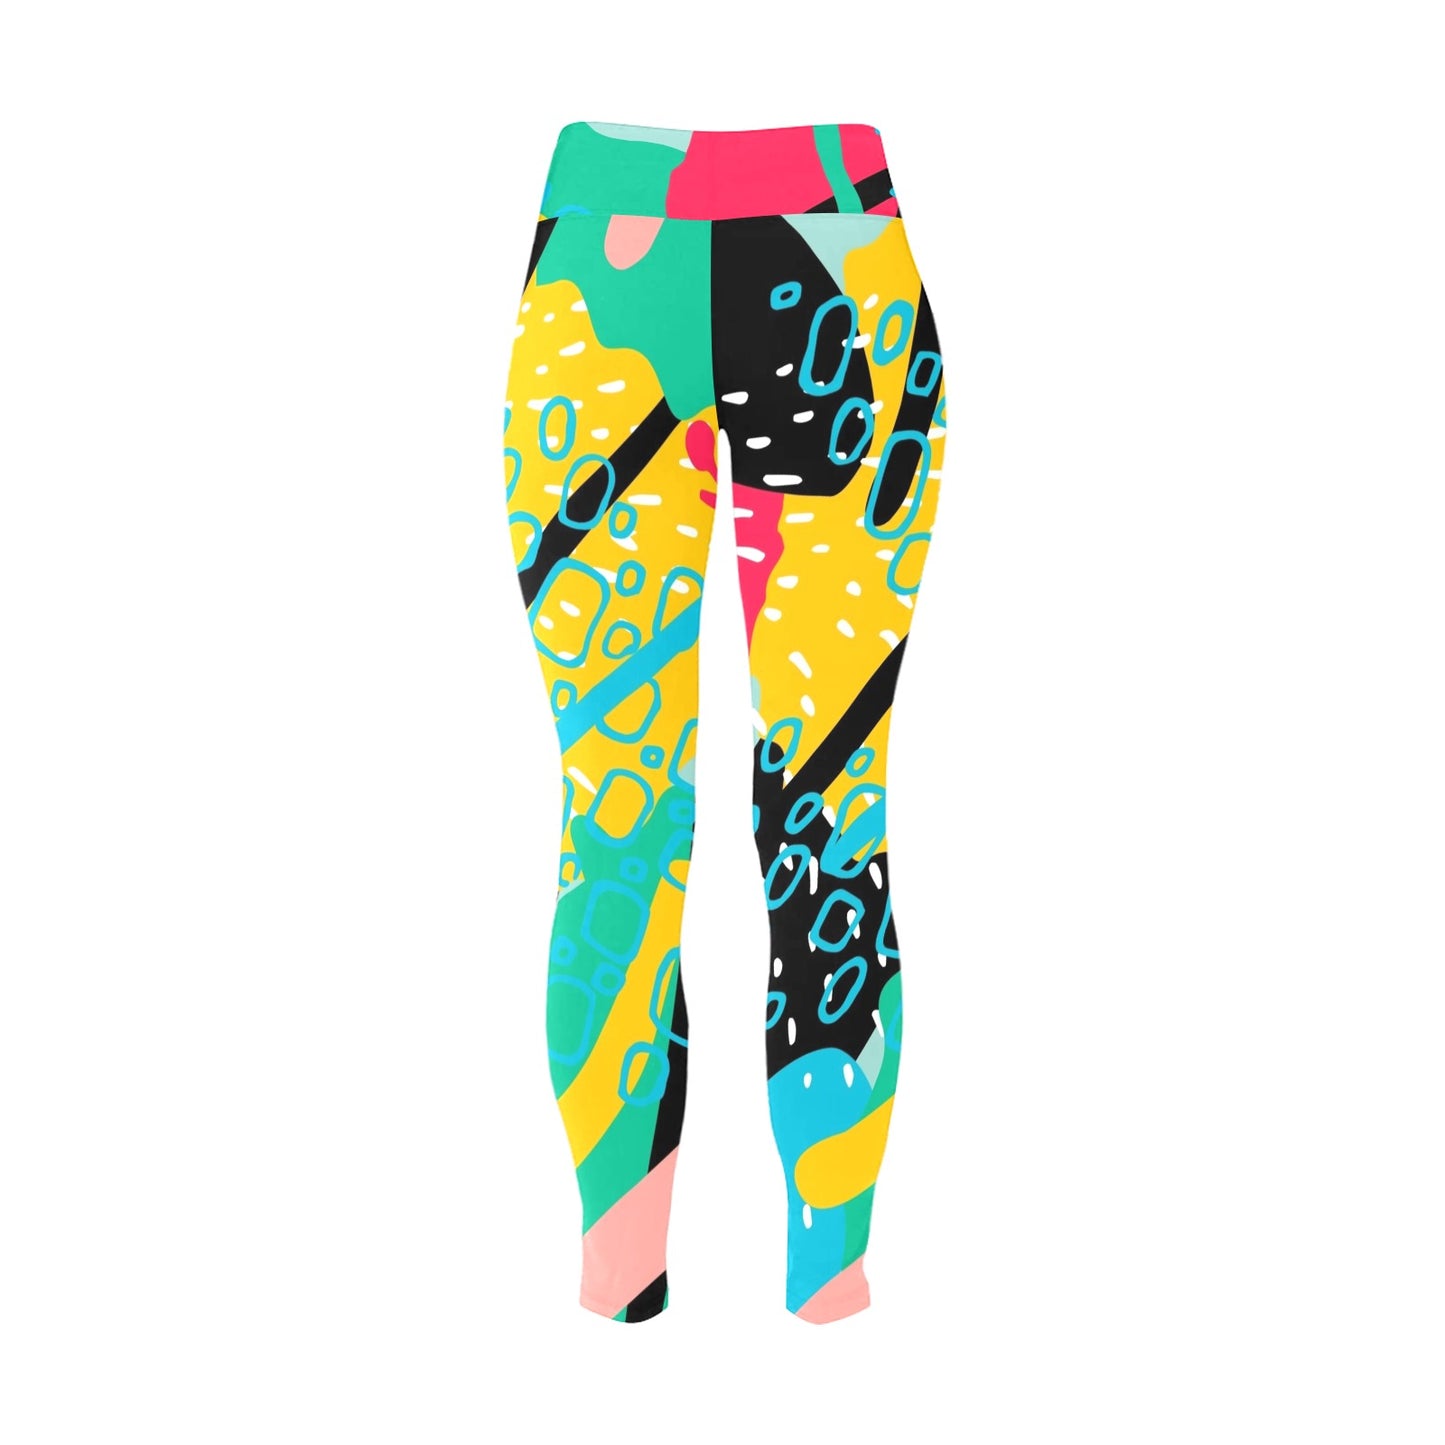 Bright And Colourful - Women's Plus Size High Waist Leggings Women's Plus Size High Waist Leggings